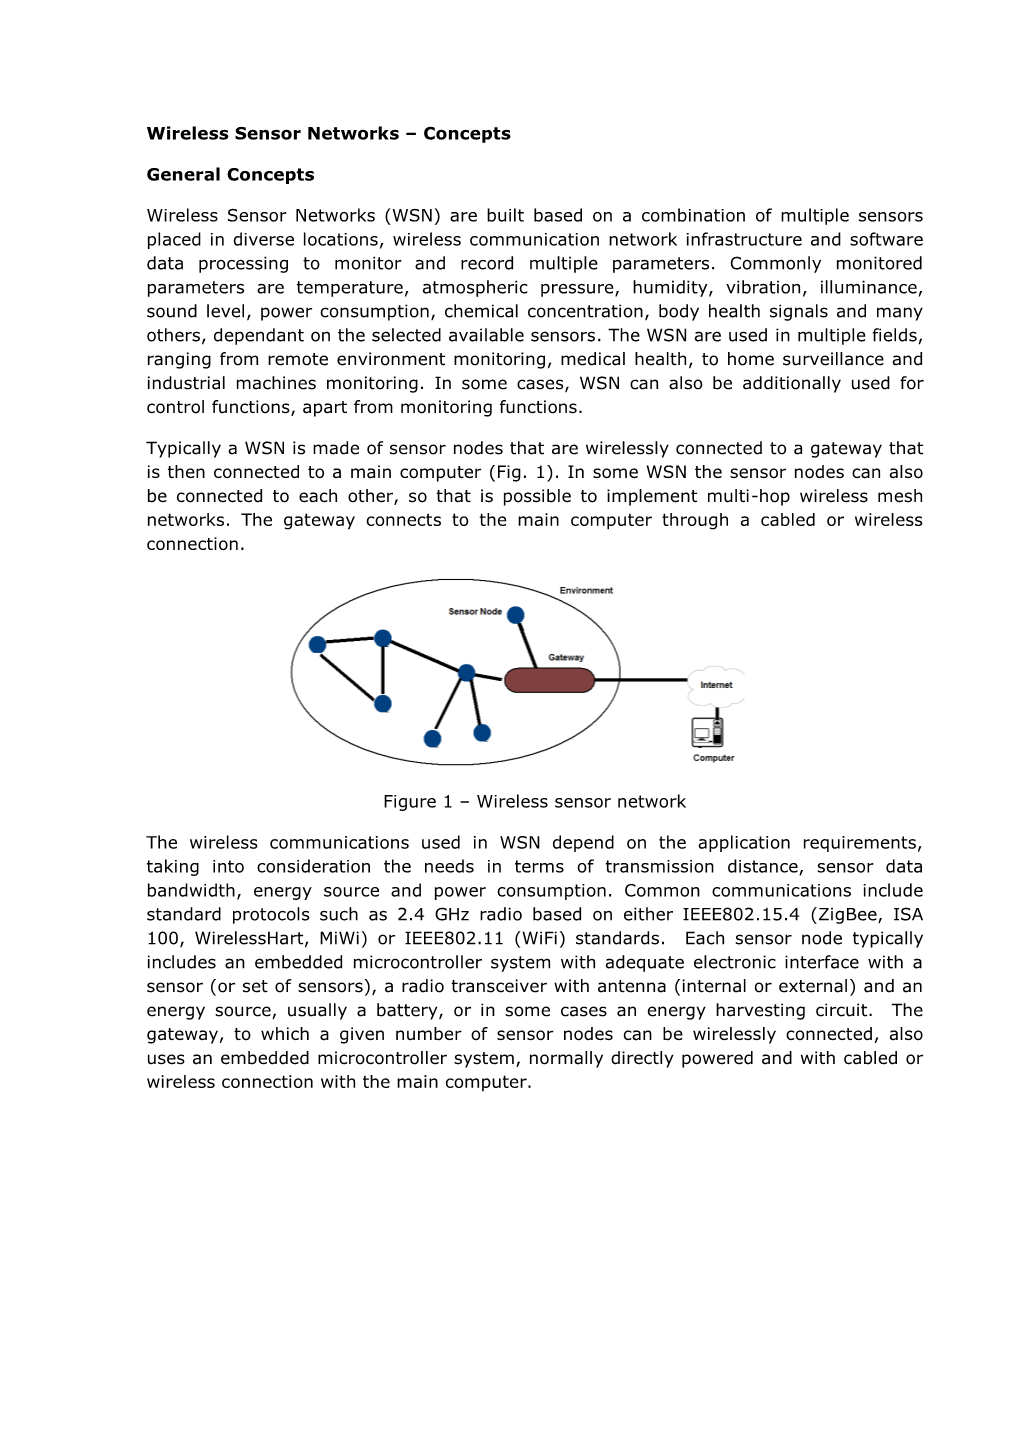 Concepts General Concepts Wireless Sensor Networks (WSN)